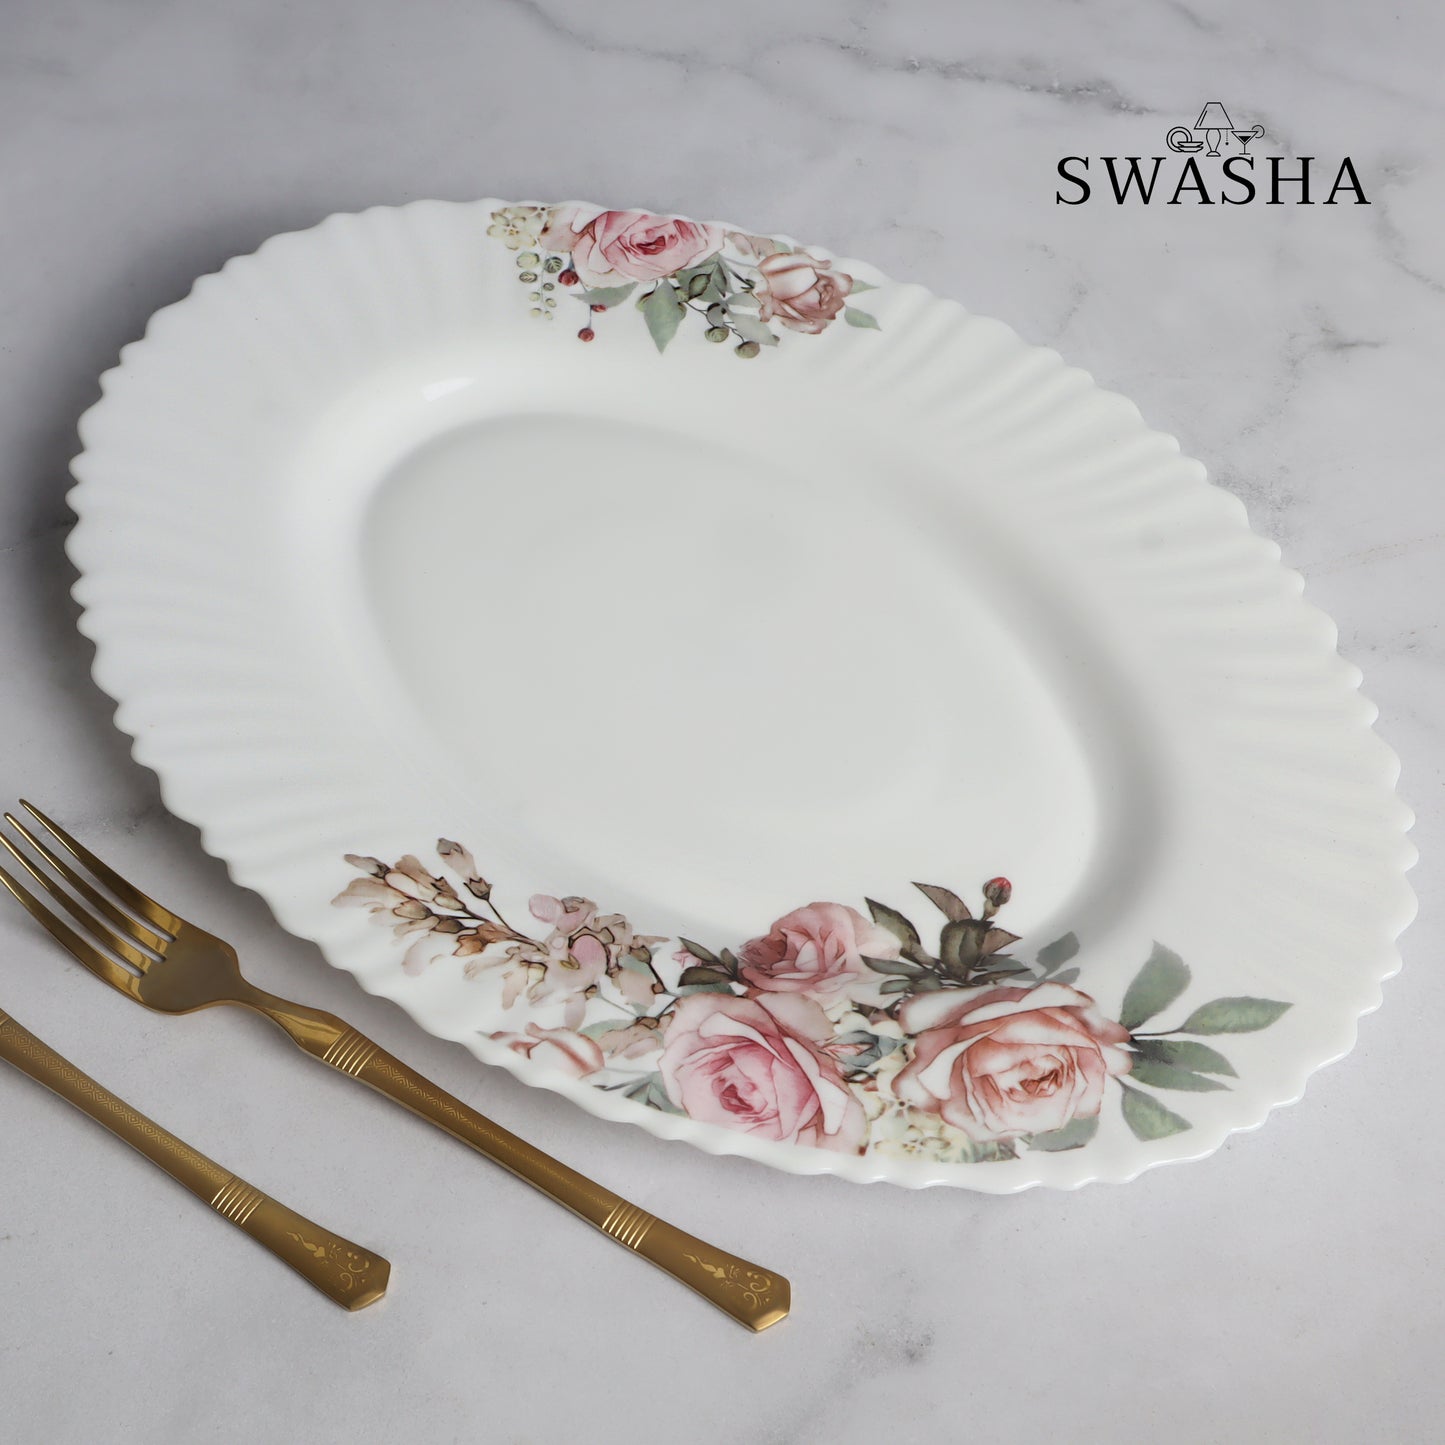 Opalware Dinner Set by Swasha - Set of 33 Pieces